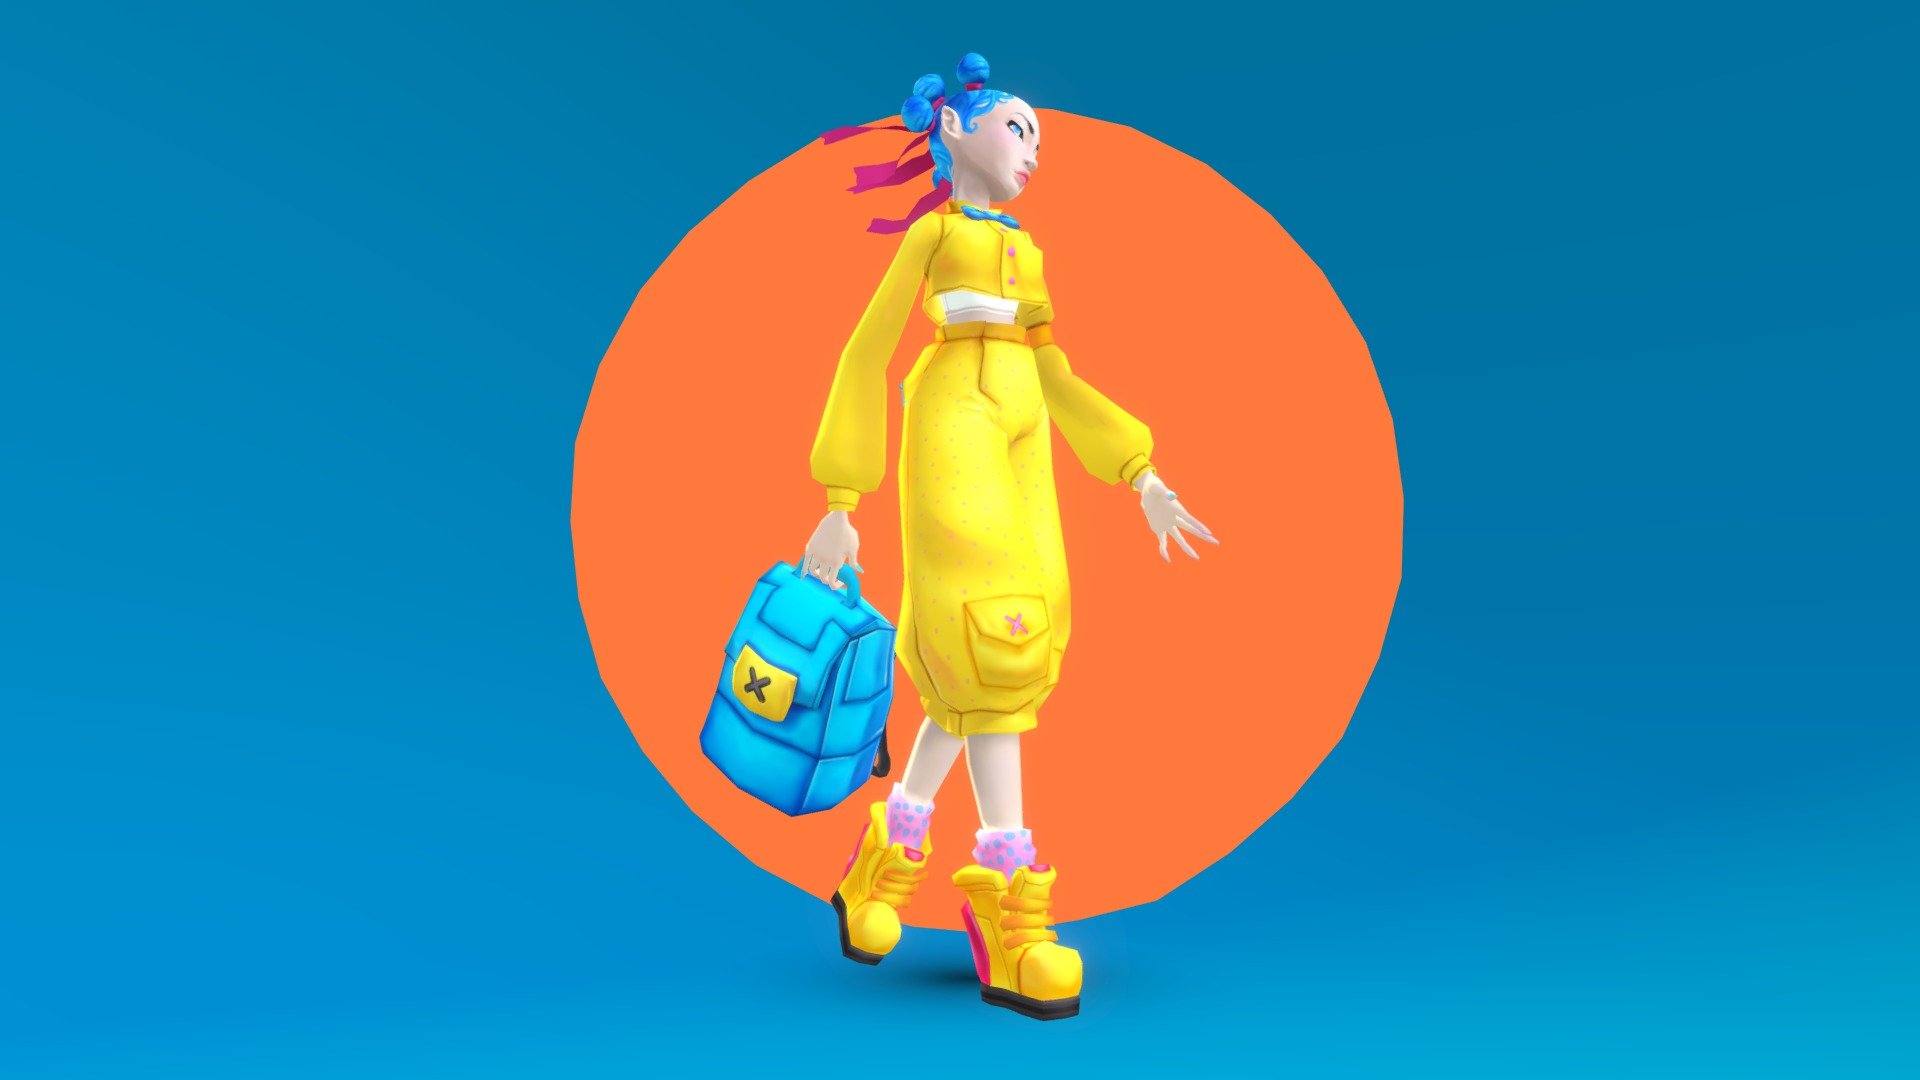 character_00.
yellow joggers and blue bag.
loves to walk.
&ndash;
EDIT:
thank you for the STAFF PICK badge Sketchfab, I am honored 3d model